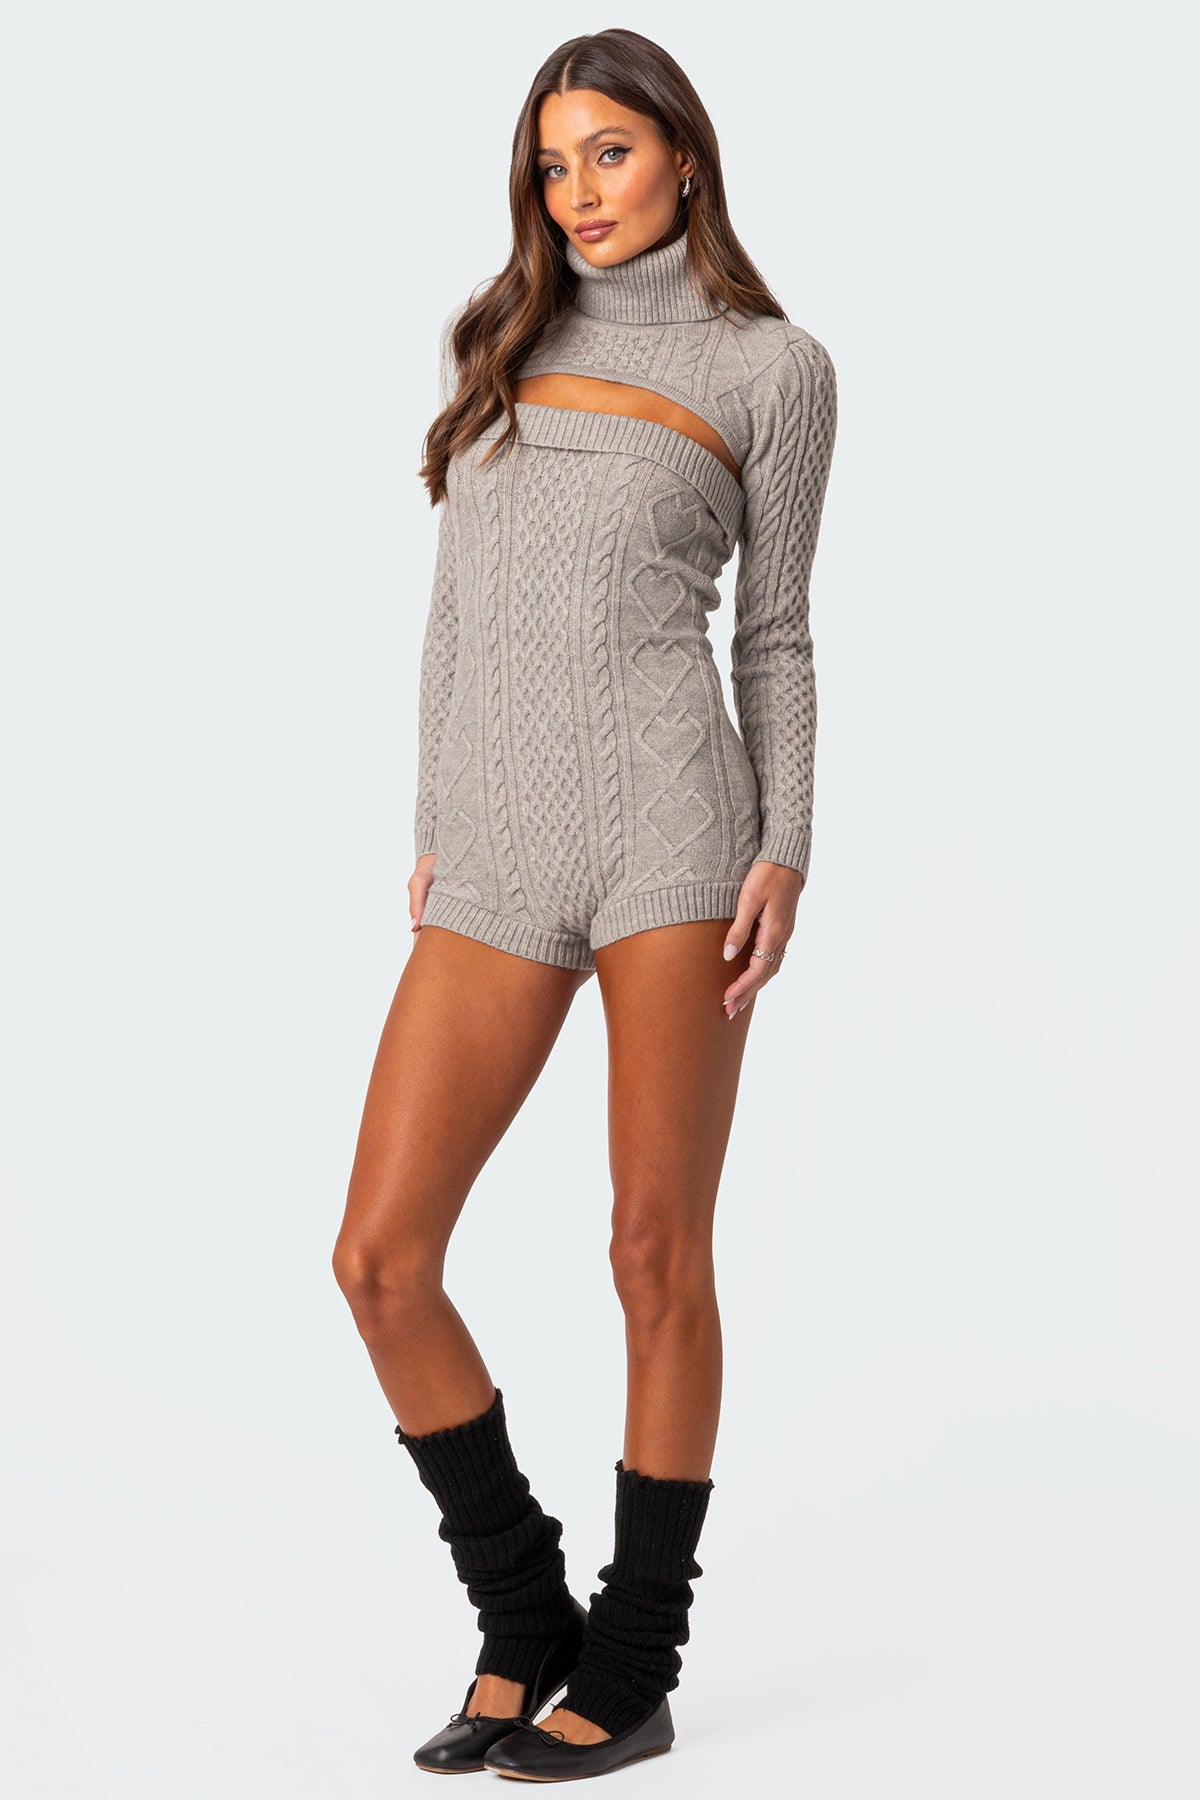 Finnley Two Piece Cable Knit Romper